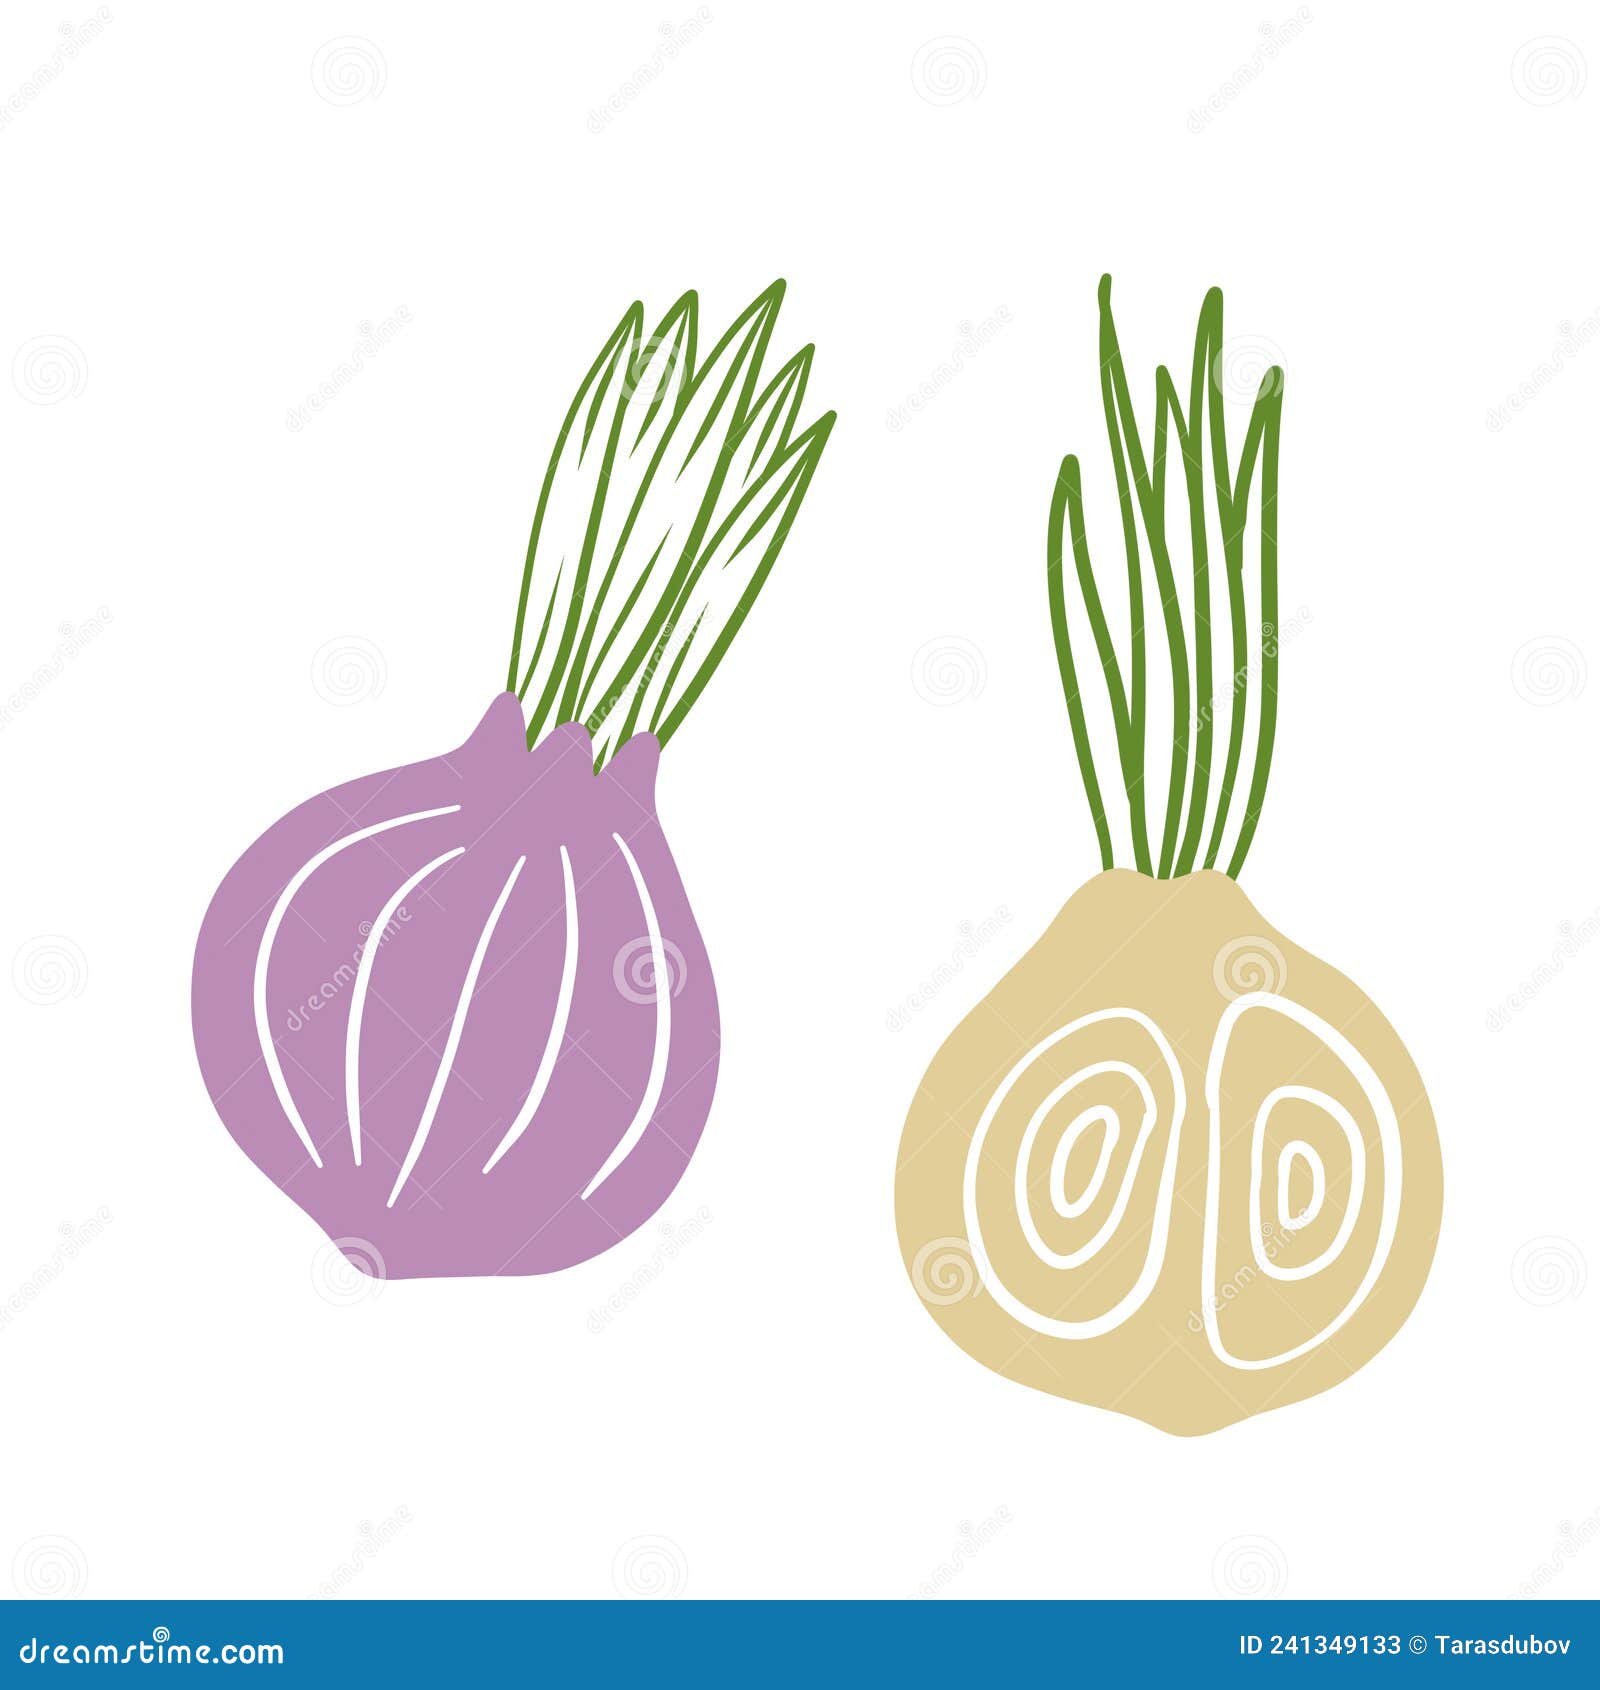 93 Onion Drawing Cartoon High Res Illustrations - Getty Images